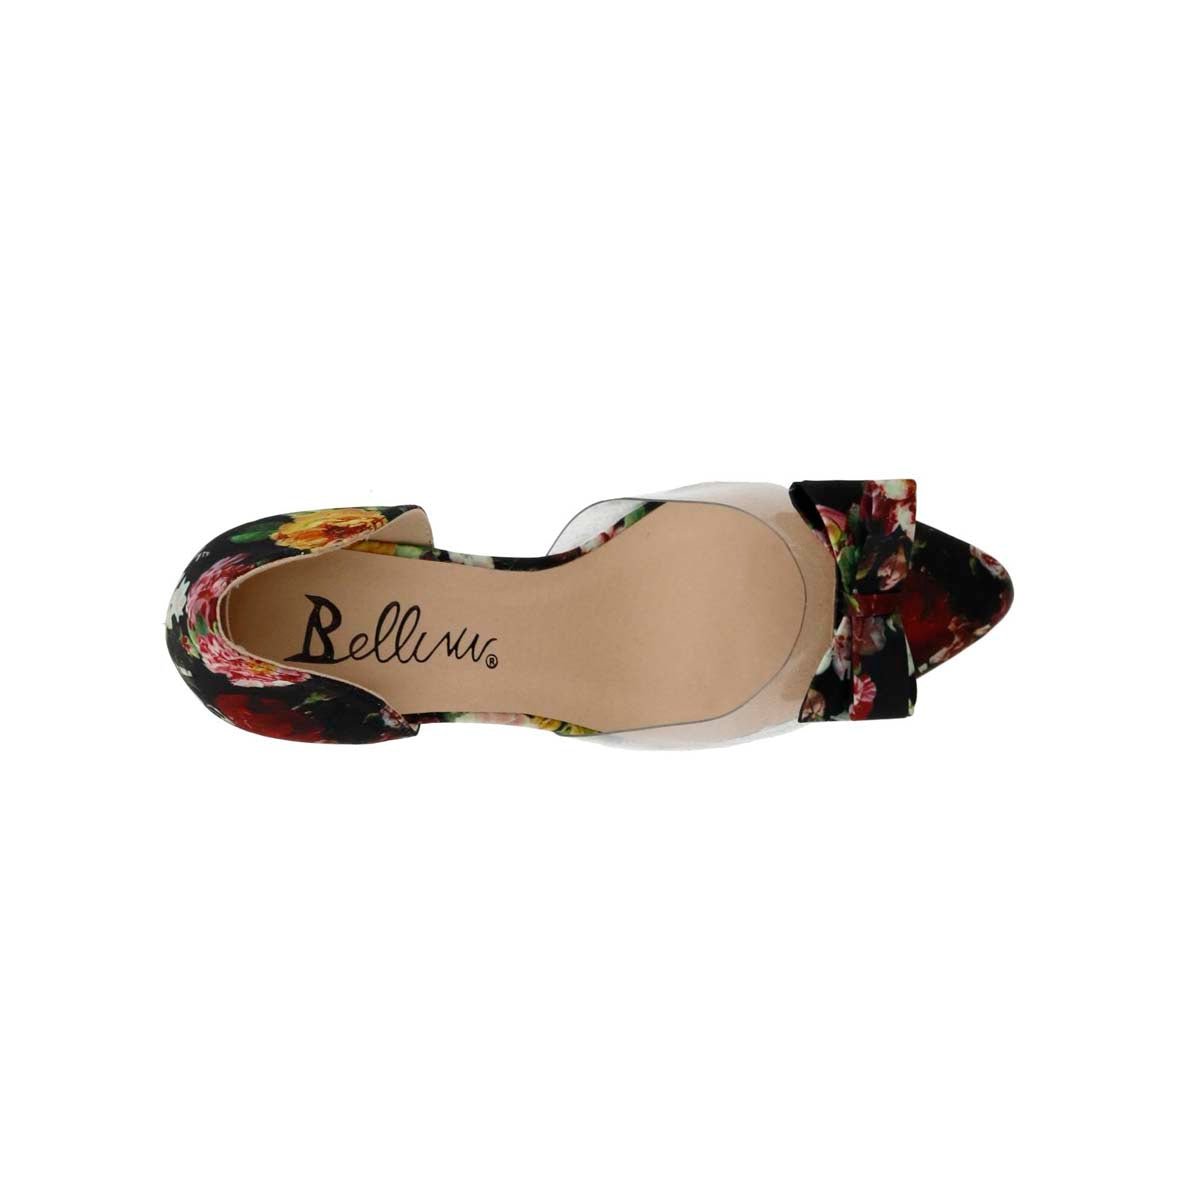 BELLINI CUPCAKE WOMEN DRESS PUMP IN BLK FLORAL/LUCITE - TLW Shoes